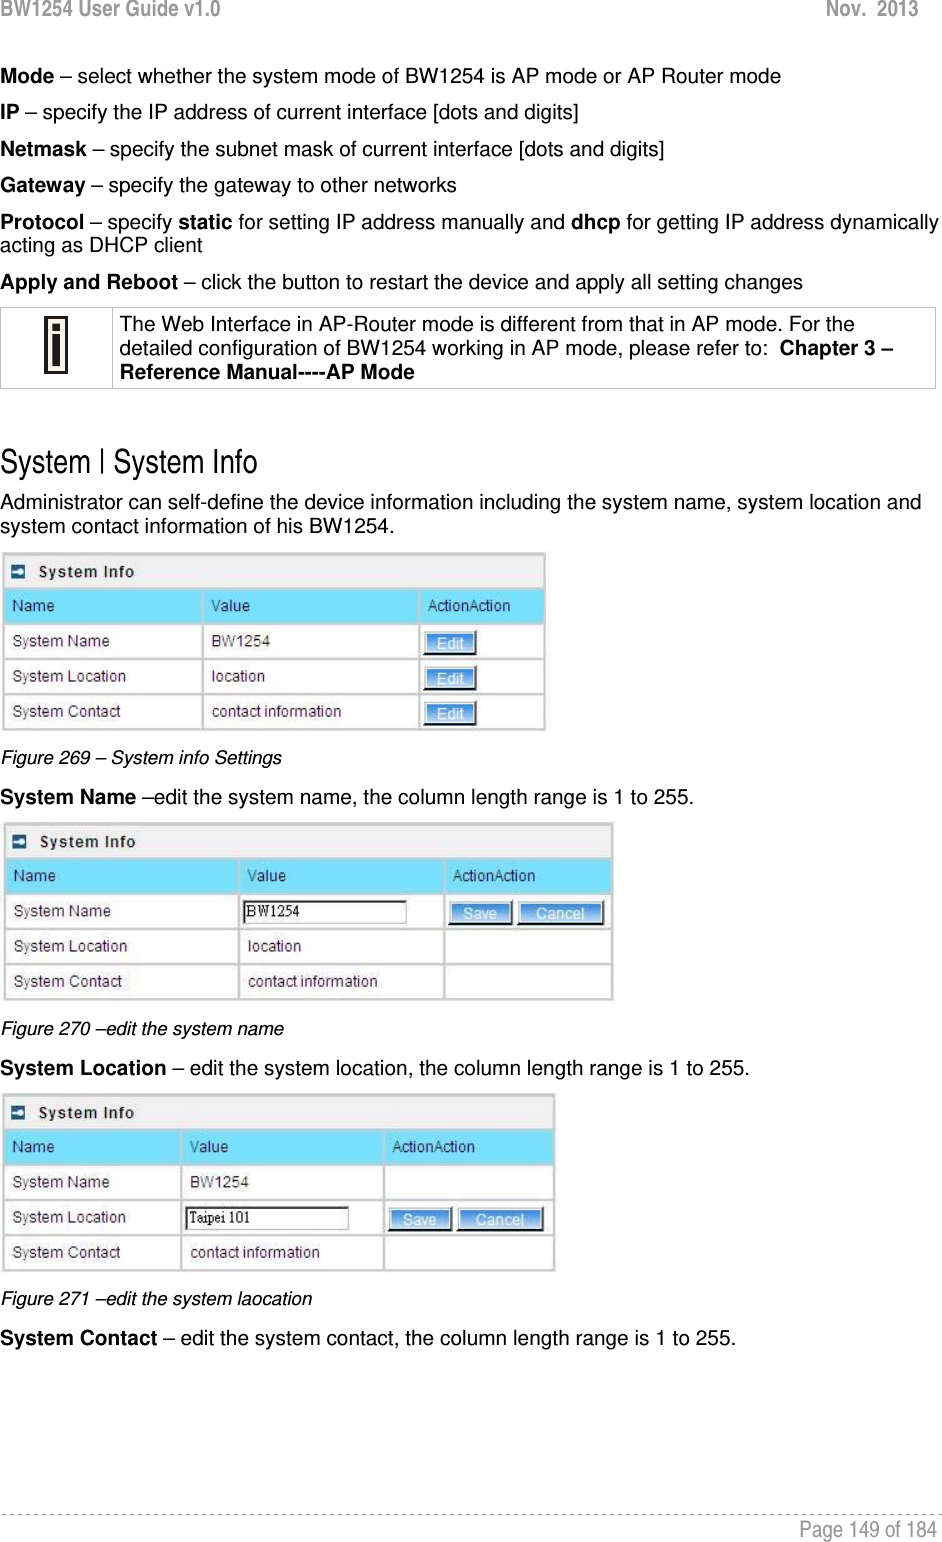 BW1254 User Guide v1.0  Nov.  2013     Page 149 of 184   Mode – select whether the system mode of BW1254 is AP mode or AP Router mode IP – specify the IP address of current interface [dots and digits] Netmask – specify the subnet mask of current interface [dots and digits] Gateway – specify the gateway to other networks Protocol – specify static for setting IP address manually and dhcp for getting IP address dynamically acting as DHCP client Apply and Reboot – click the button to restart the device and apply all setting changes  The Web Interface in AP-Router mode is different from that in AP mode. For the detailed configuration of BW1254 working in AP mode, please refer to:  Chapter 3 – Reference Manual----AP Mode  System | System Info Administrator can self-define the device information including the system name, system location and system contact information of his BW1254.  Figure 269 – System info Settings System Name –edit the system name, the column length range is 1 to 255.  Figure 270 –edit the system name System Location – edit the system location, the column length range is 1 to 255.  Figure 271 –edit the system laocation System Contact – edit the system contact, the column length range is 1 to 255. 